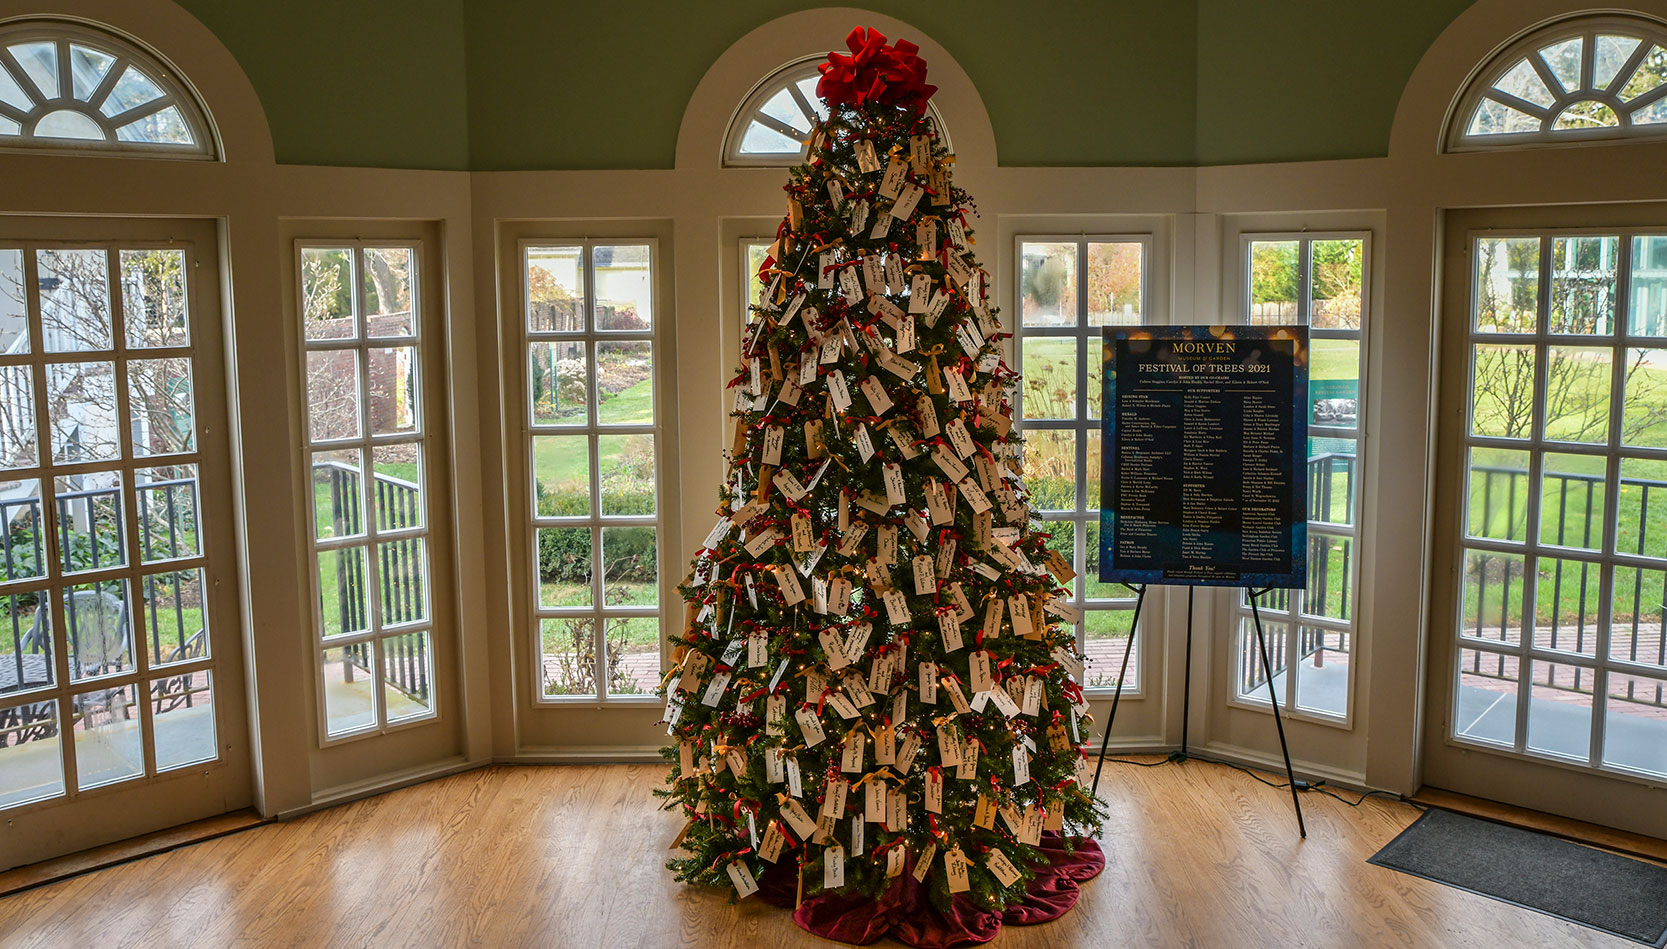 photo - A Christmas tree adorned with dozens of tags with peoples names stands in the middle of a green room. The rear garden area can be seen through windows and doors surrounding the display.